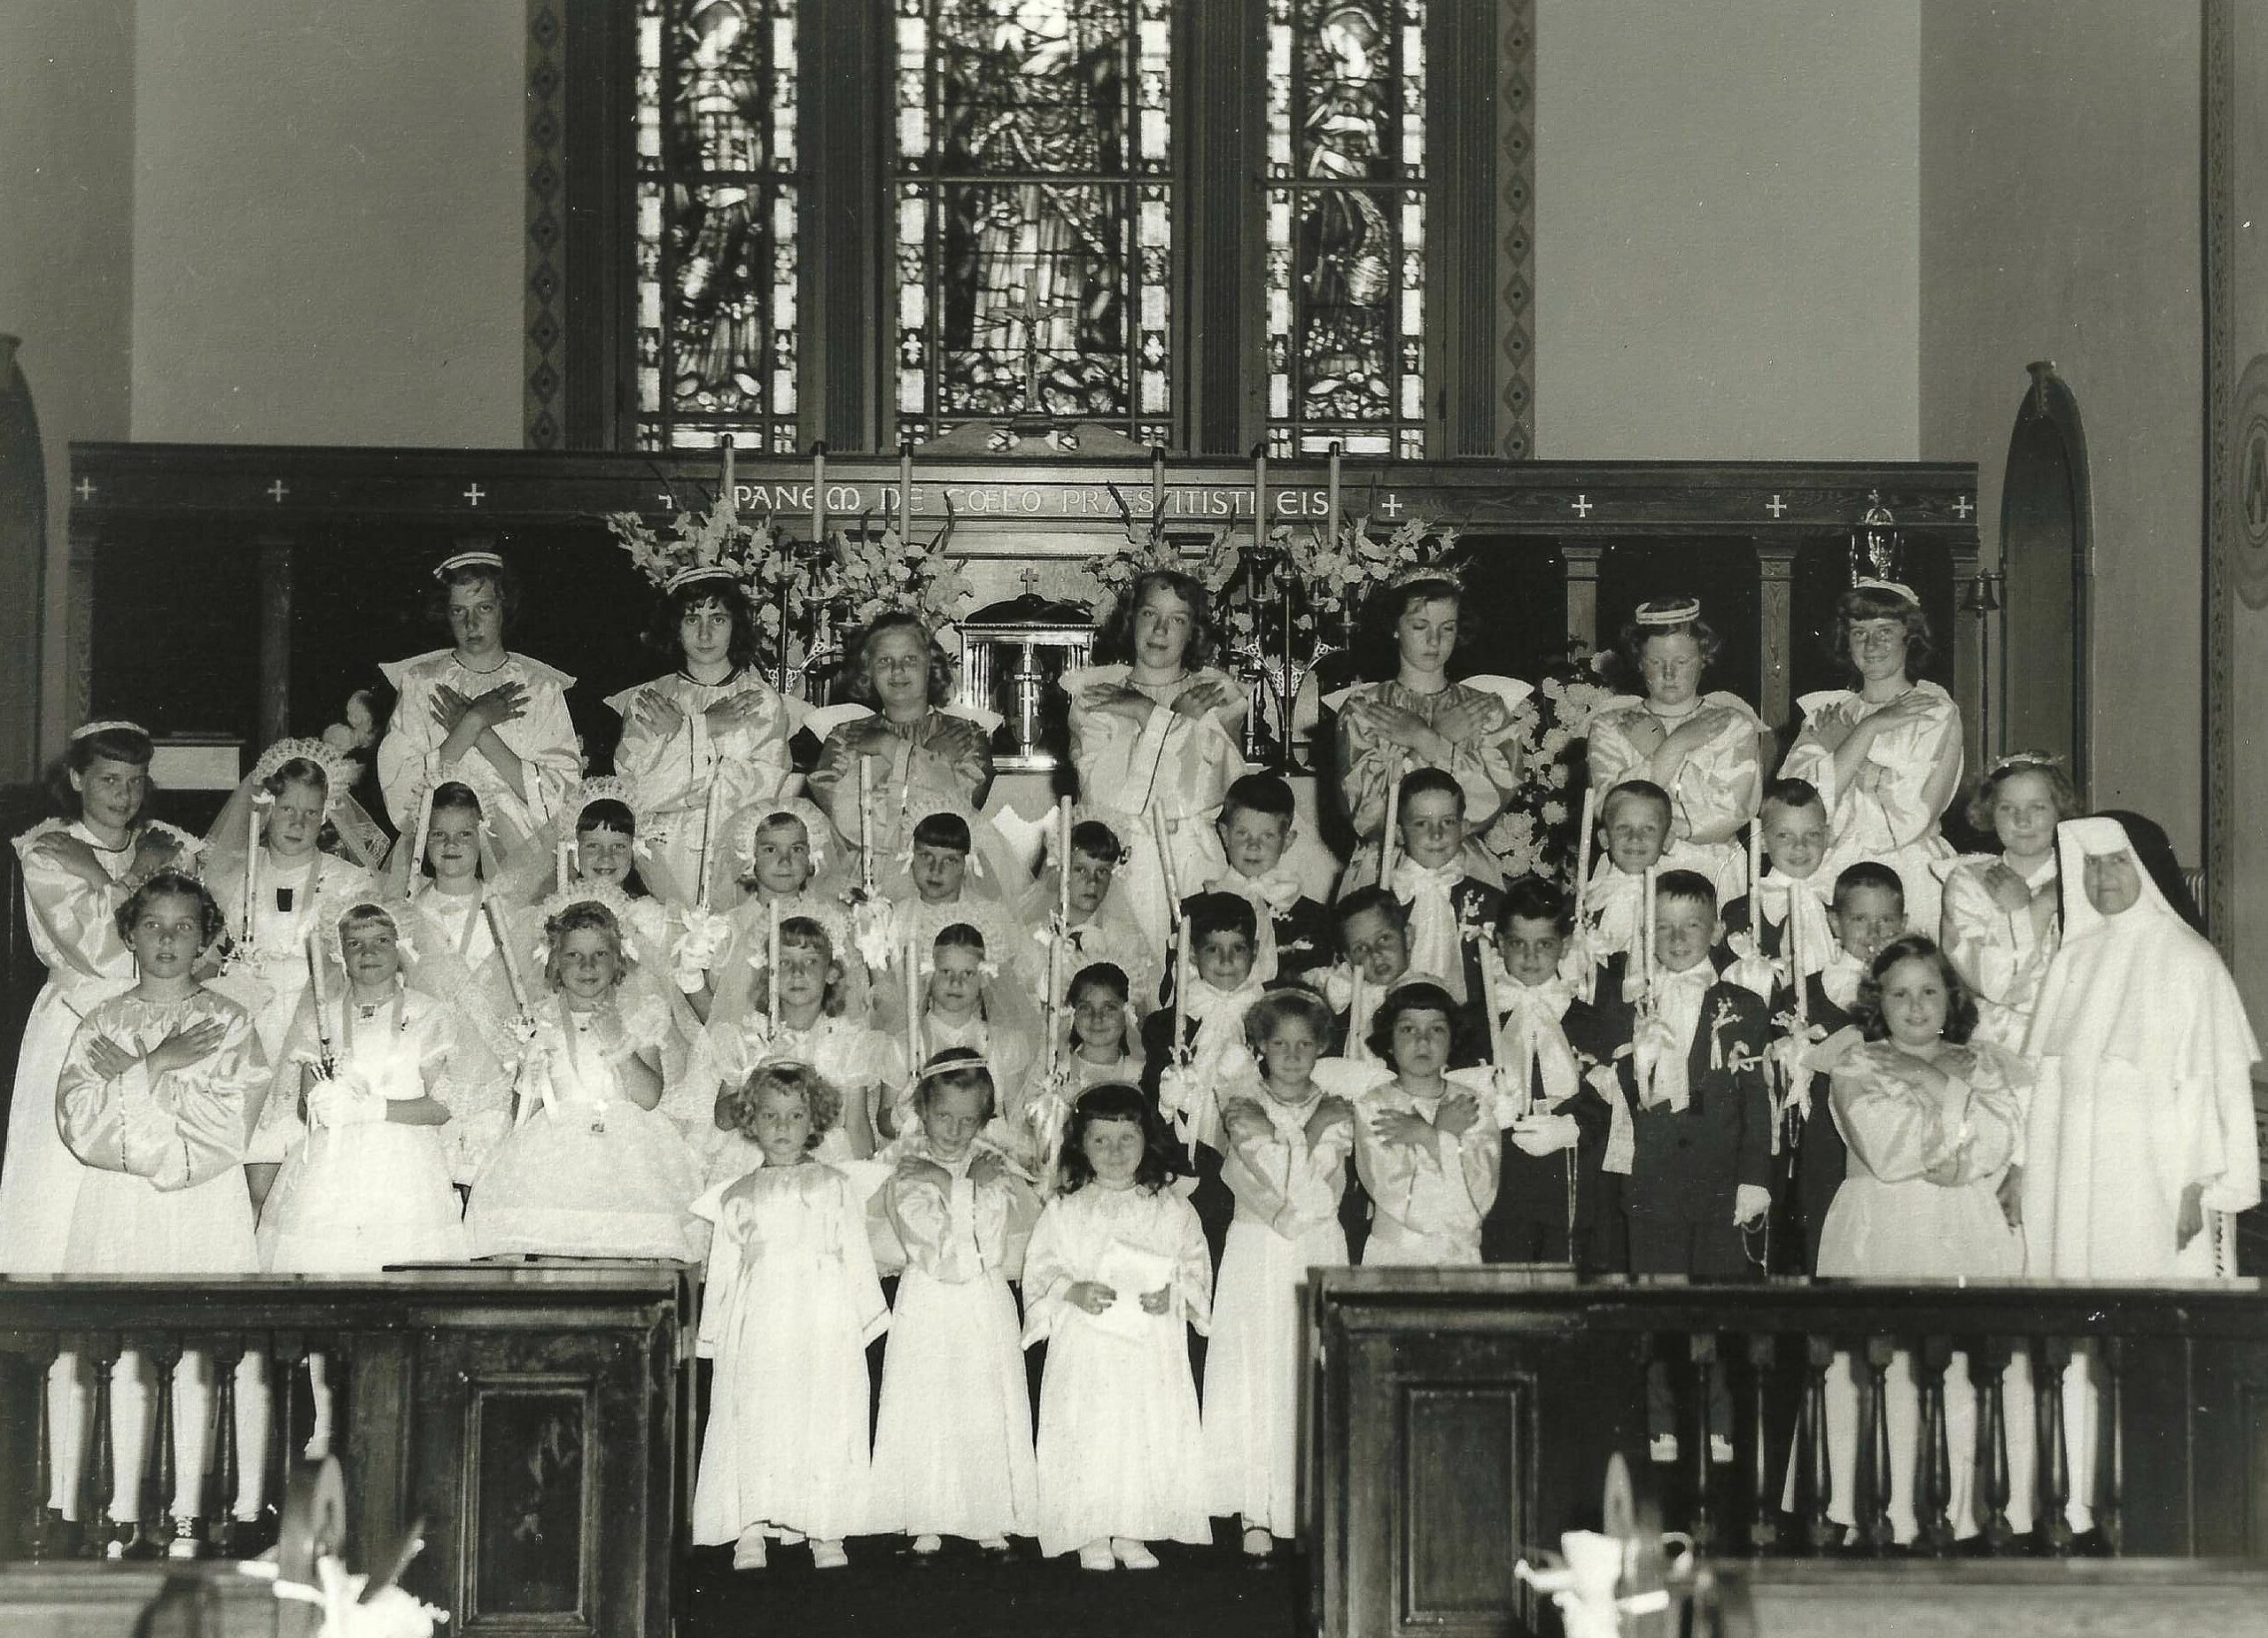 A First Communion class gather in the church sanctuary. COURTESY QUEEN OF THE MOST HOLY ROSARY CATHOLIC CHURCH